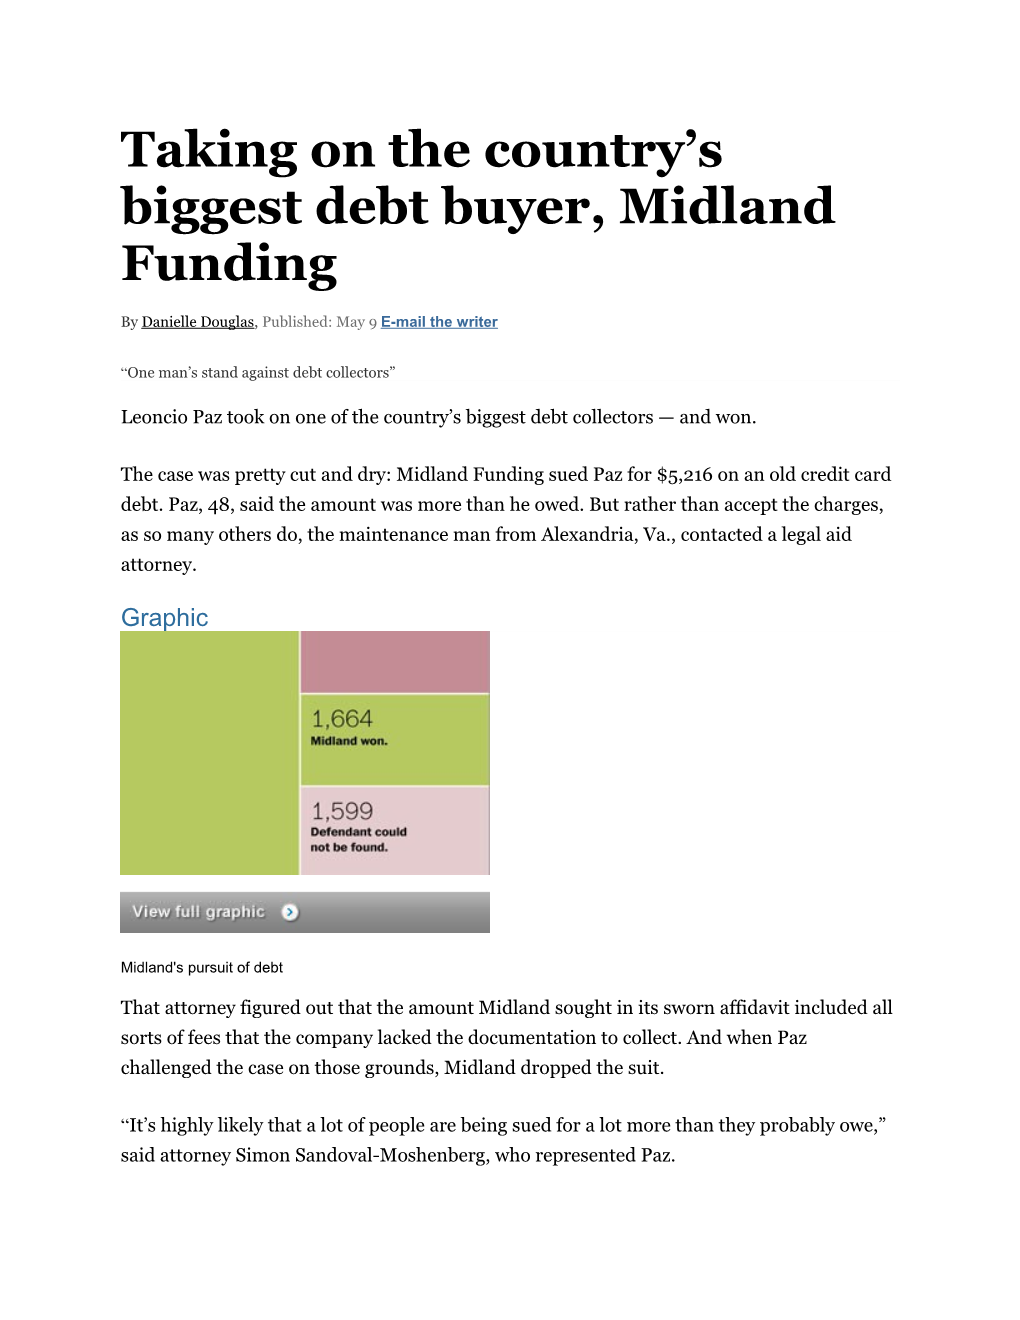 Taking on the Country S Biggest Debt Buyer, Midland Funding